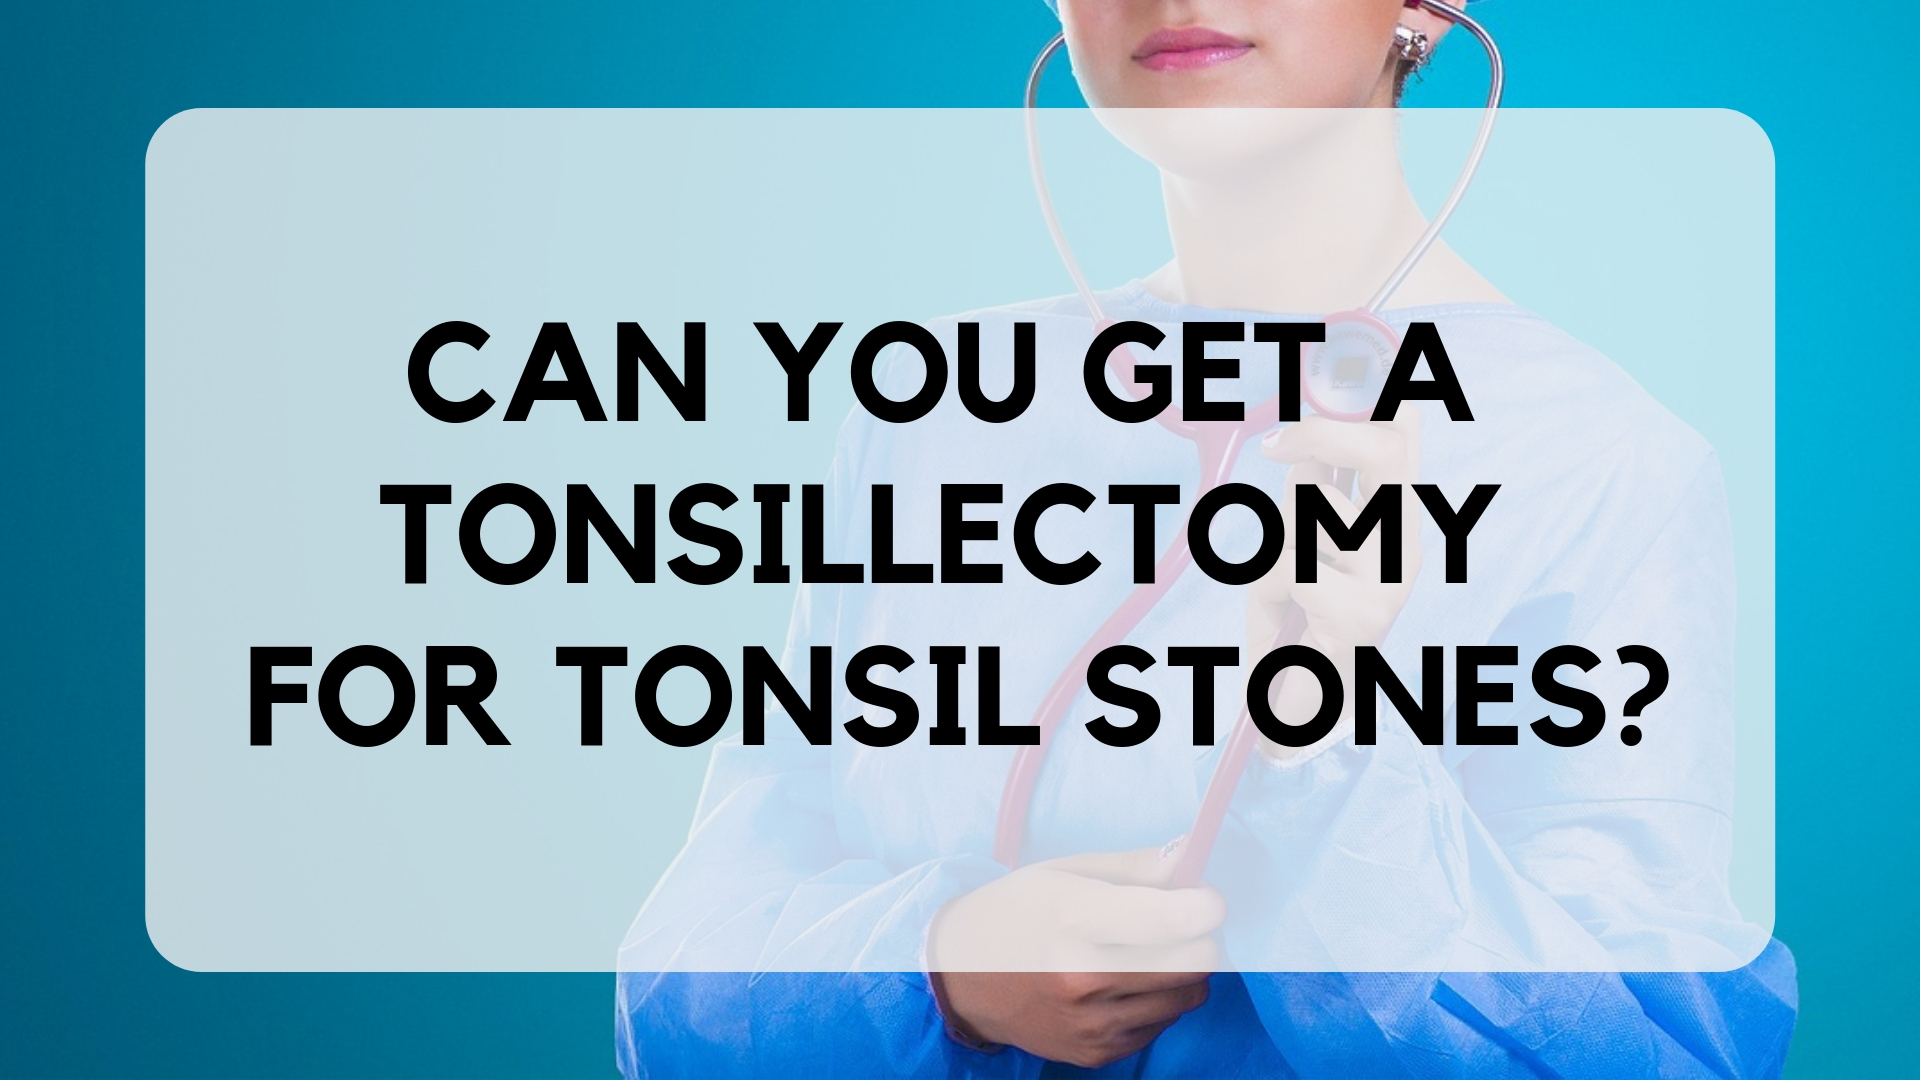 Tonsillectomy For Tonsil Stones